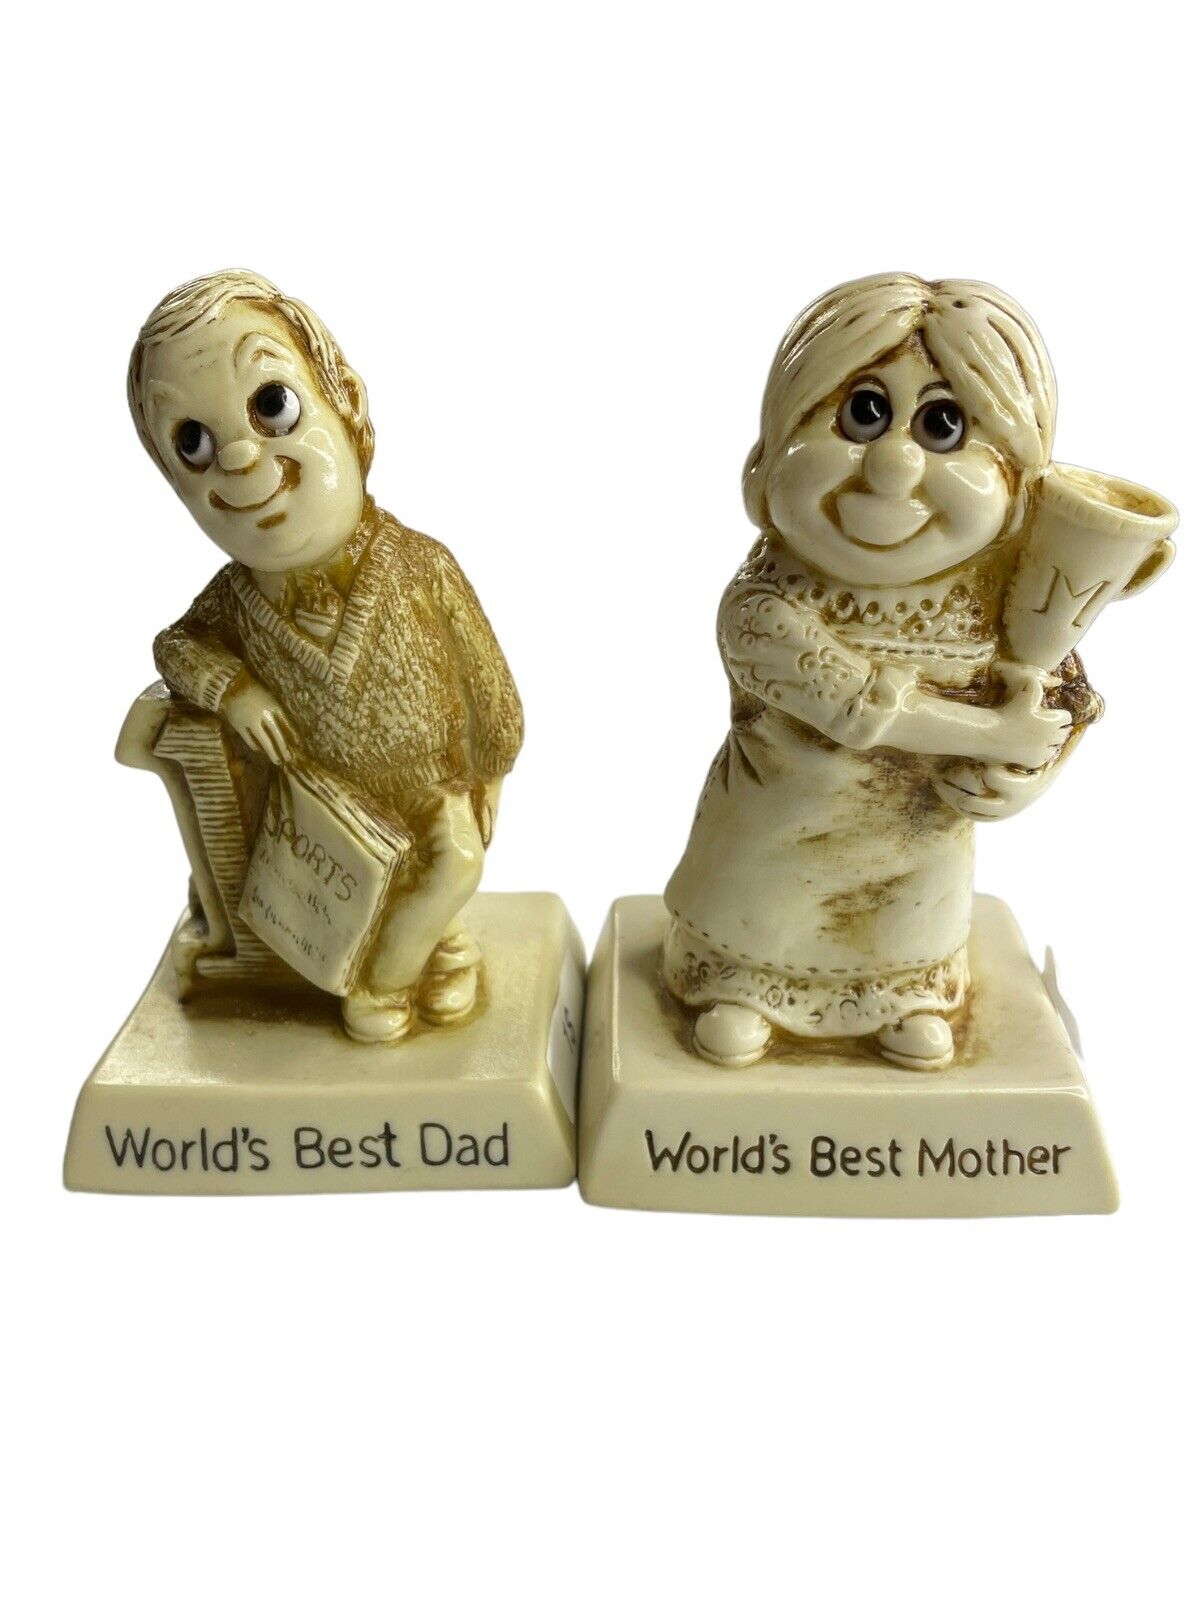 VINTAGE Worlds Best Mother & Dad Russ Berrie Figurine Set USA Made Great Cond.